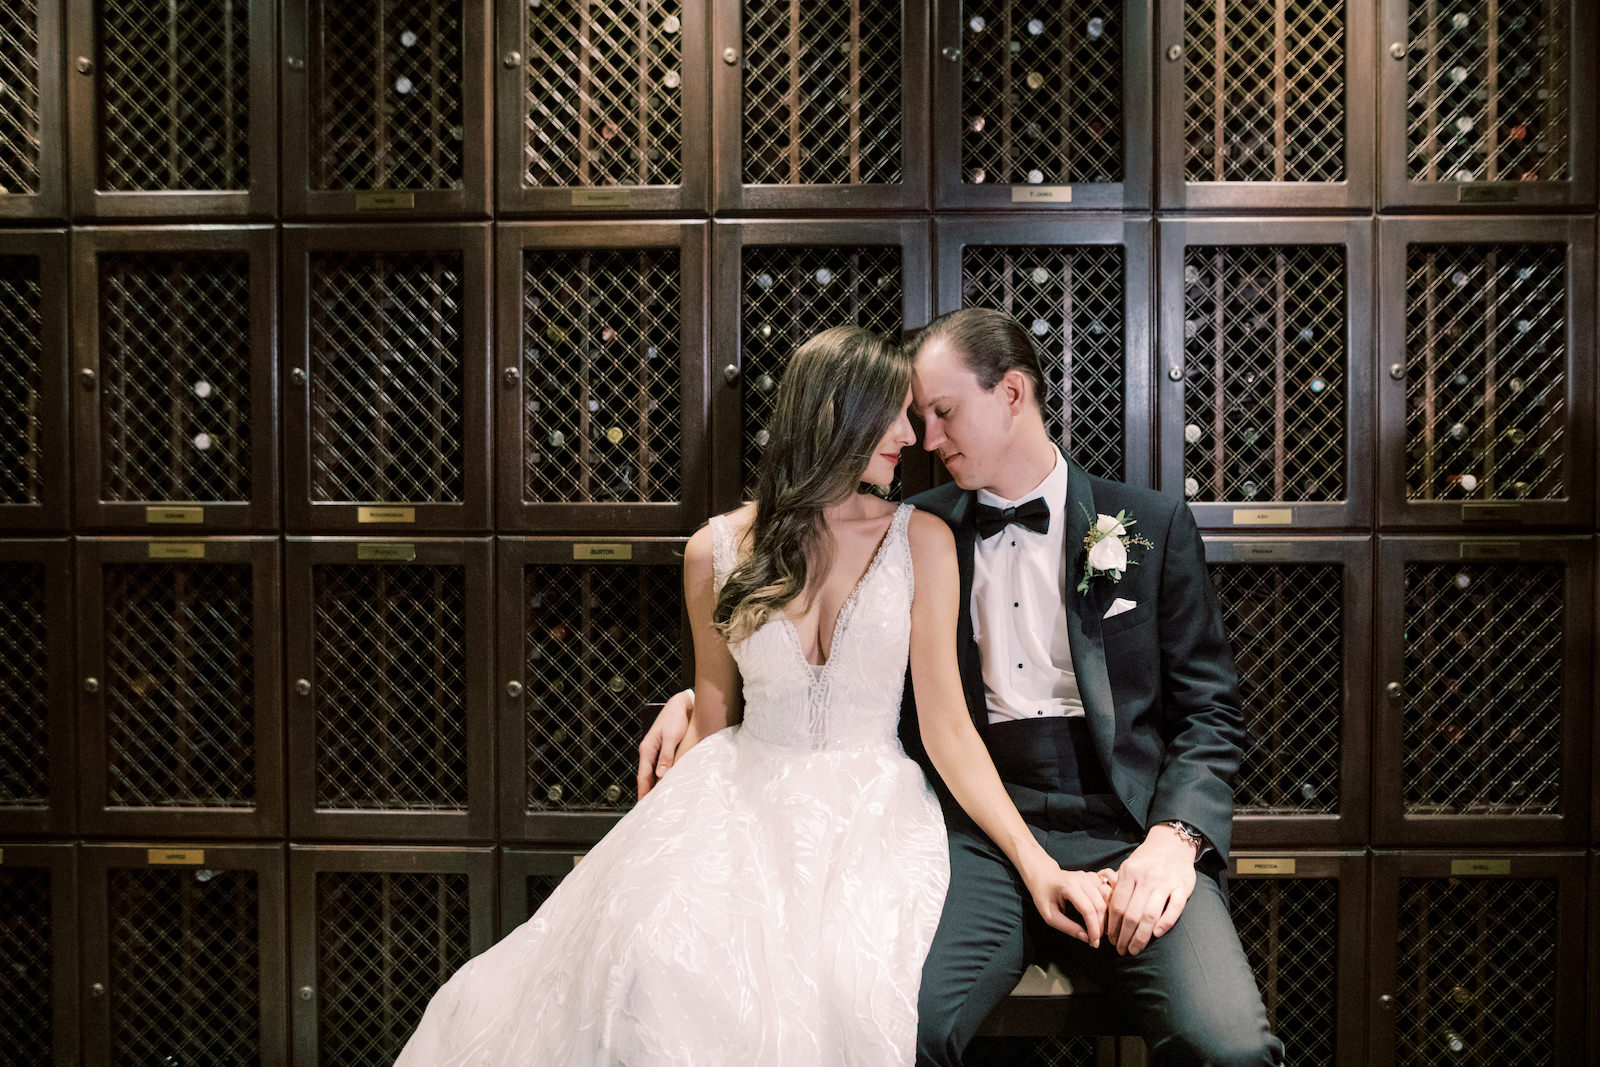 Indoor Bride and Groom Portrait at Downtown Tampa Wedding Venue The Tampa Club Wine Room | V Neck Embroidered Illusion Panel Allure Couture Designer Wedding Dress Bridal Gown | Groom in Classic Black Suit Tux with Bow Tie